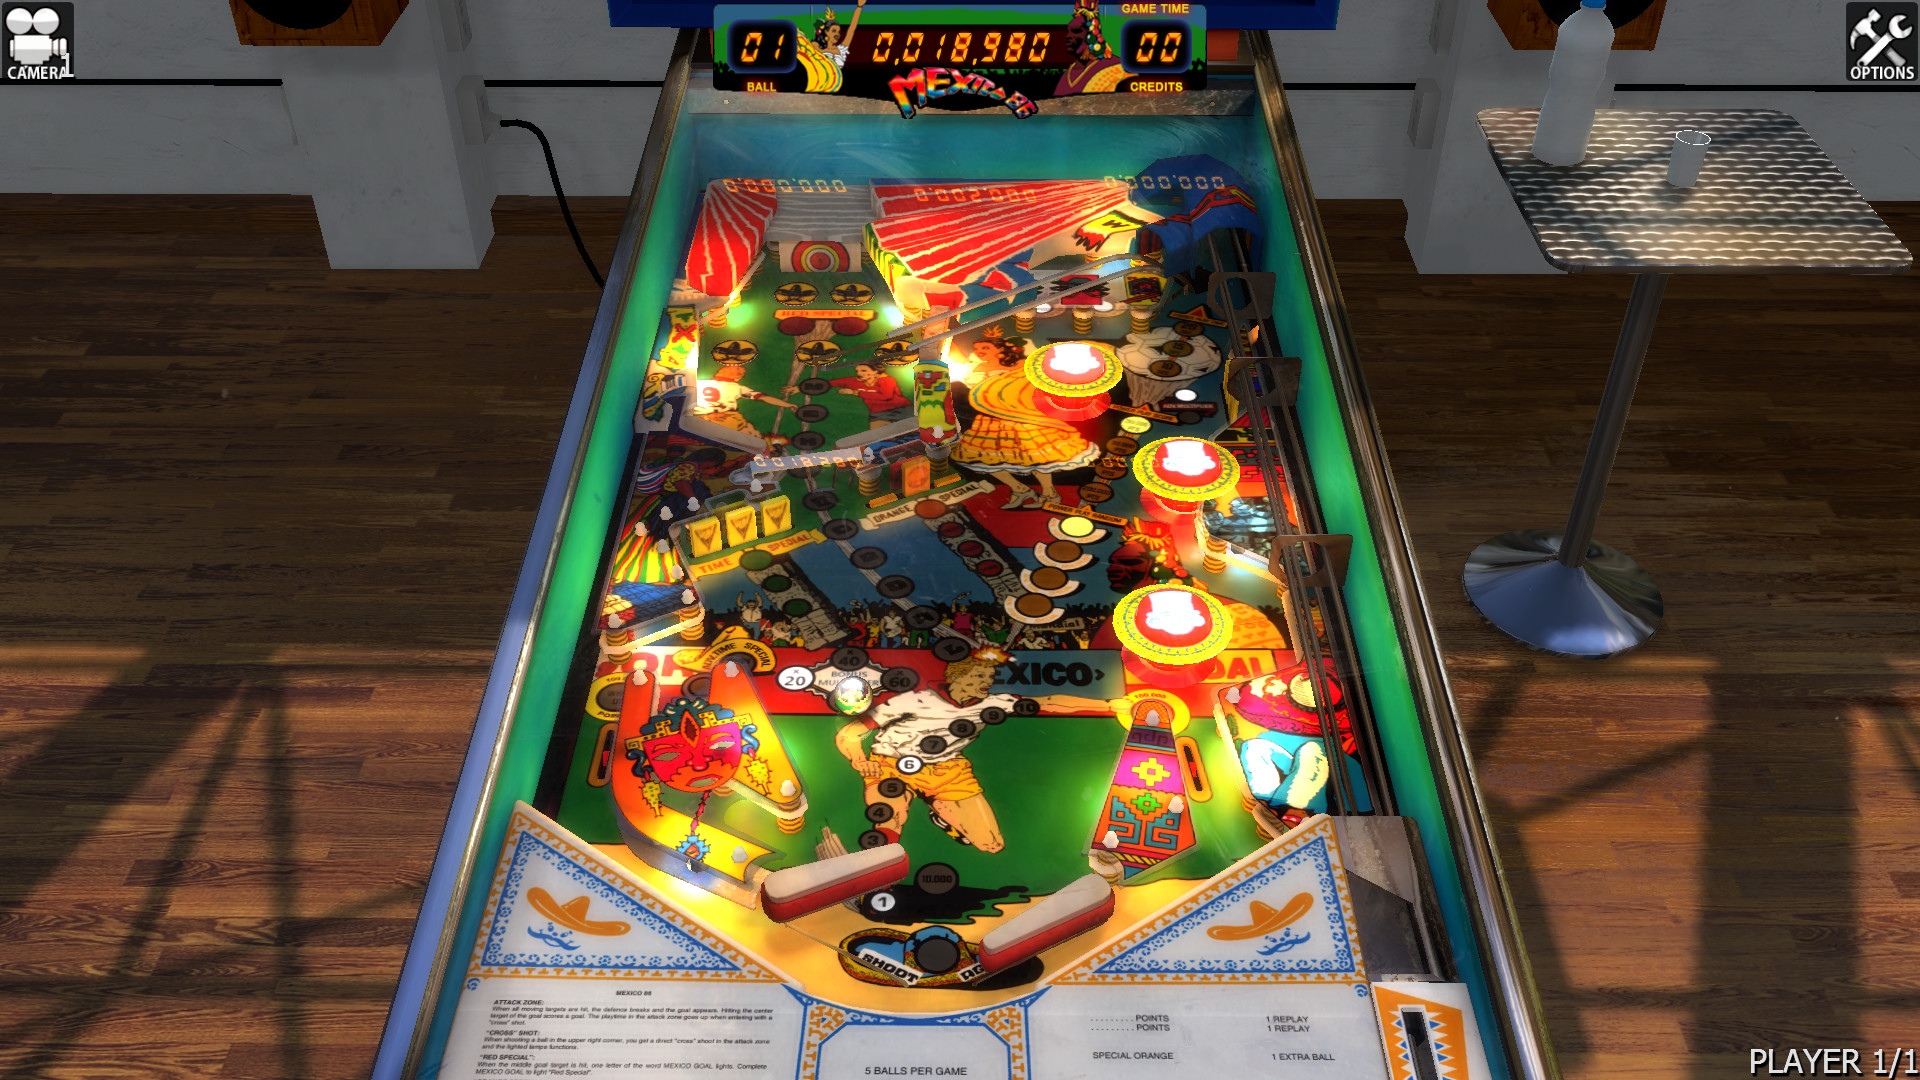 Zaccaria Pinball - Mexico '86 Table Featured Screenshot #1